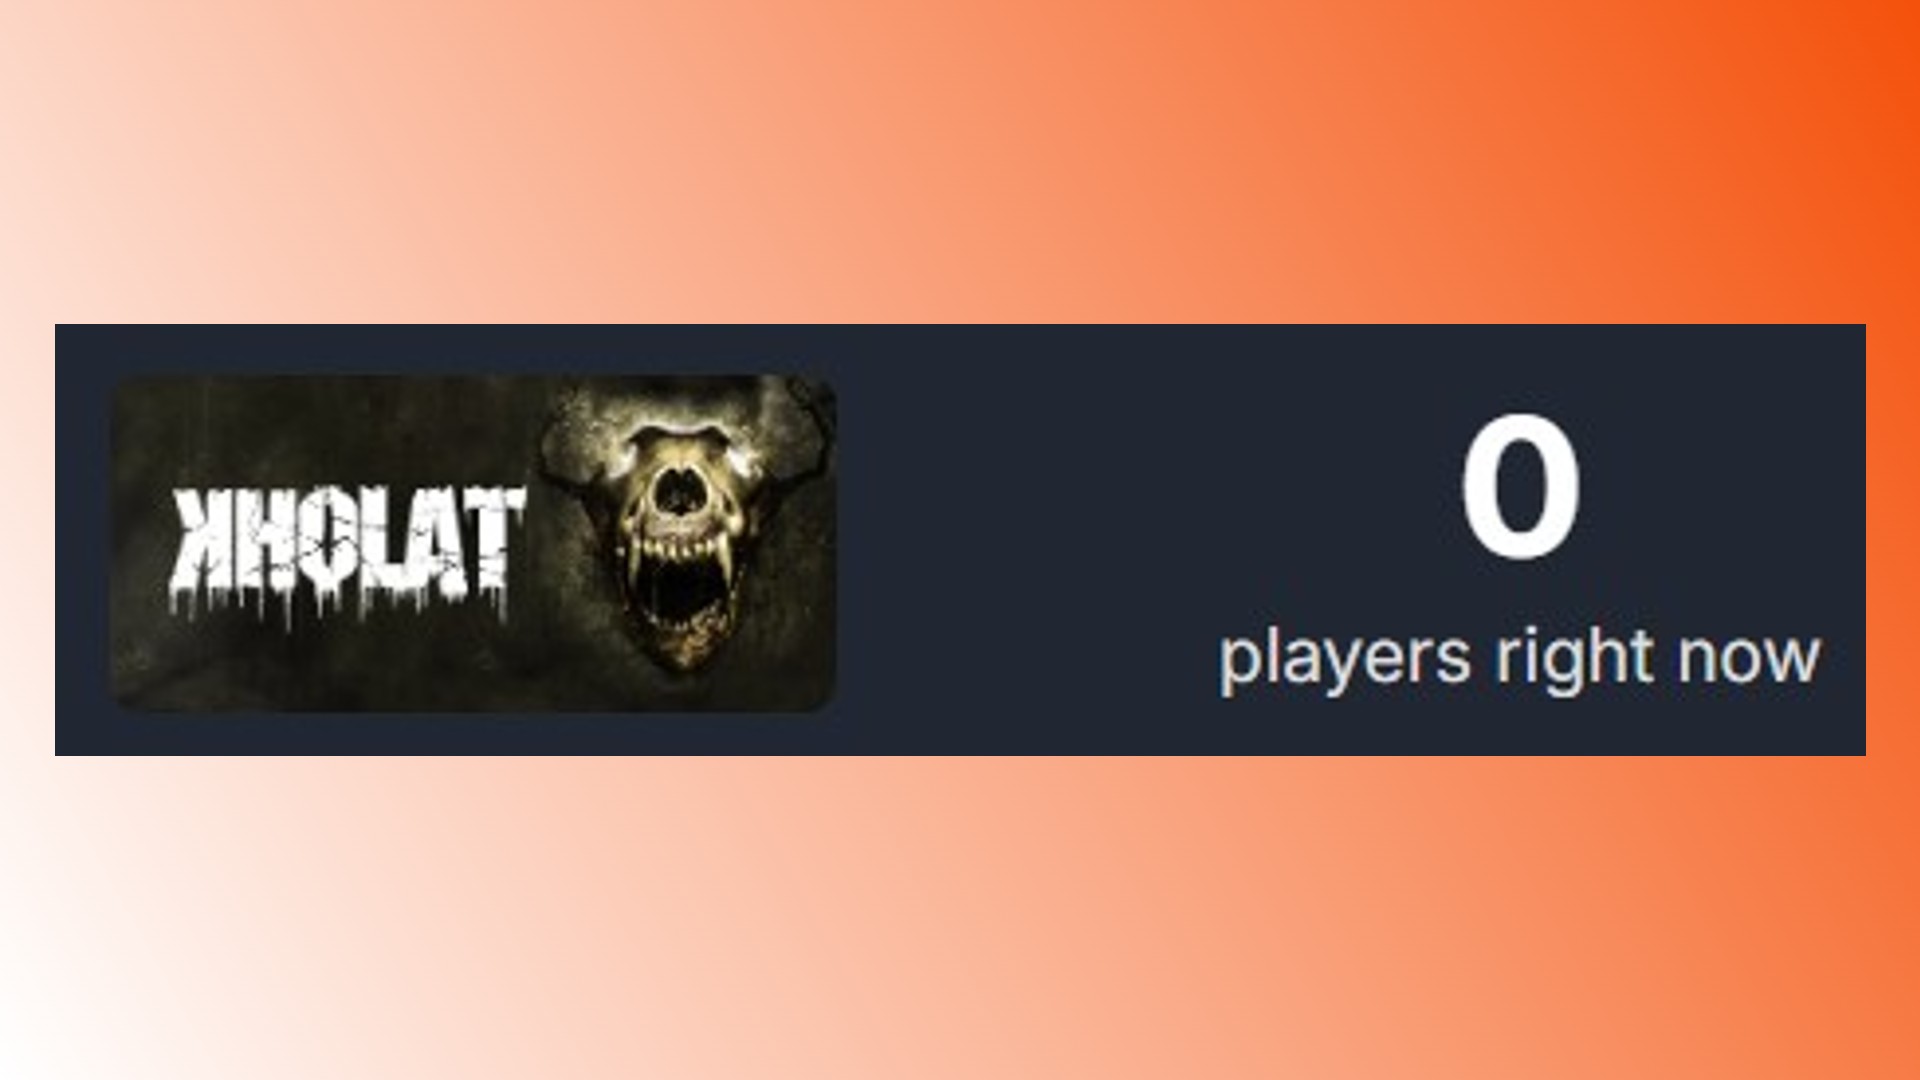 Steam games zero players: The Kholat Steam player count, for the indie horror game